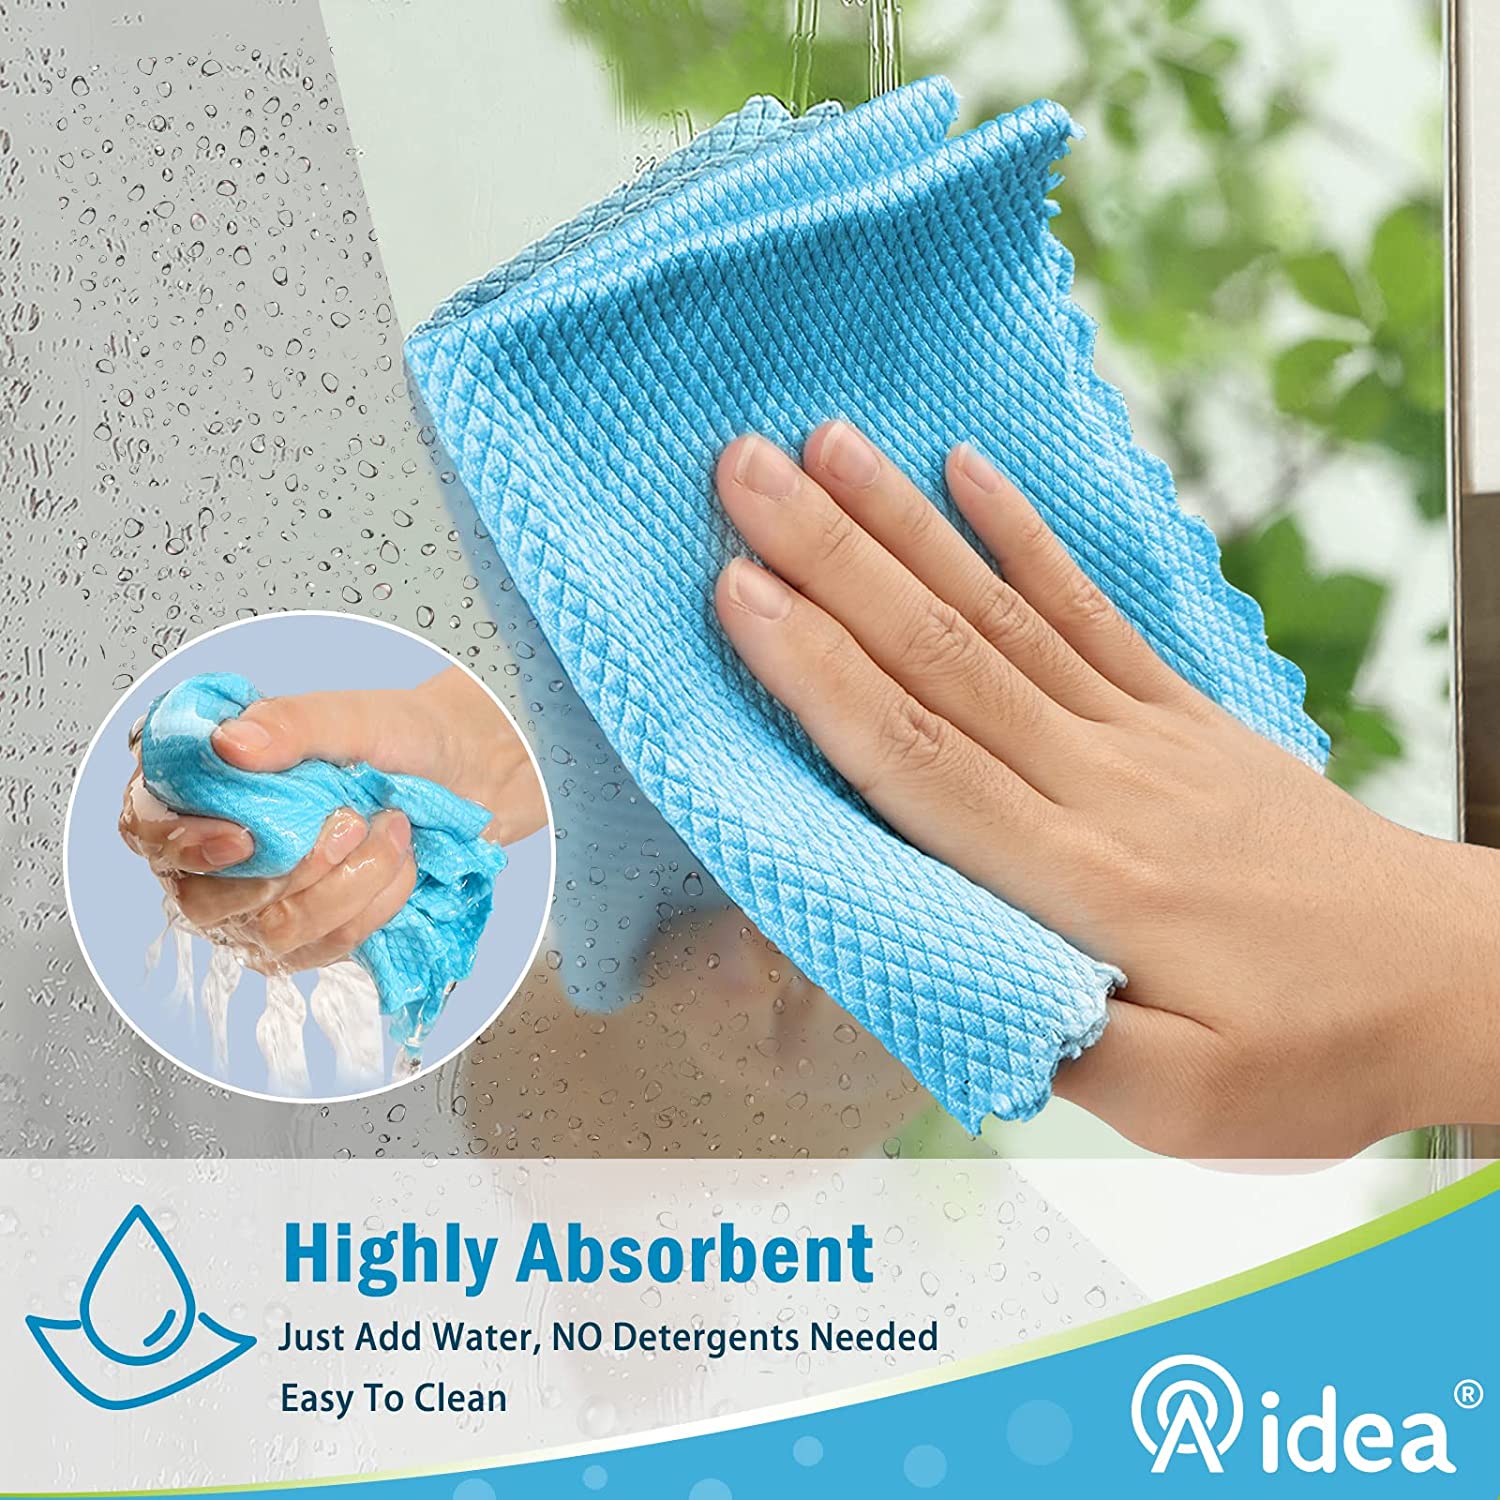 AIDEA Microfiber Glass Cleaning Cloths-8PK, 16x16 Premium Microfiber Glass and Window Cleaner, Lint Free Quickly Clean Windows, Glasses